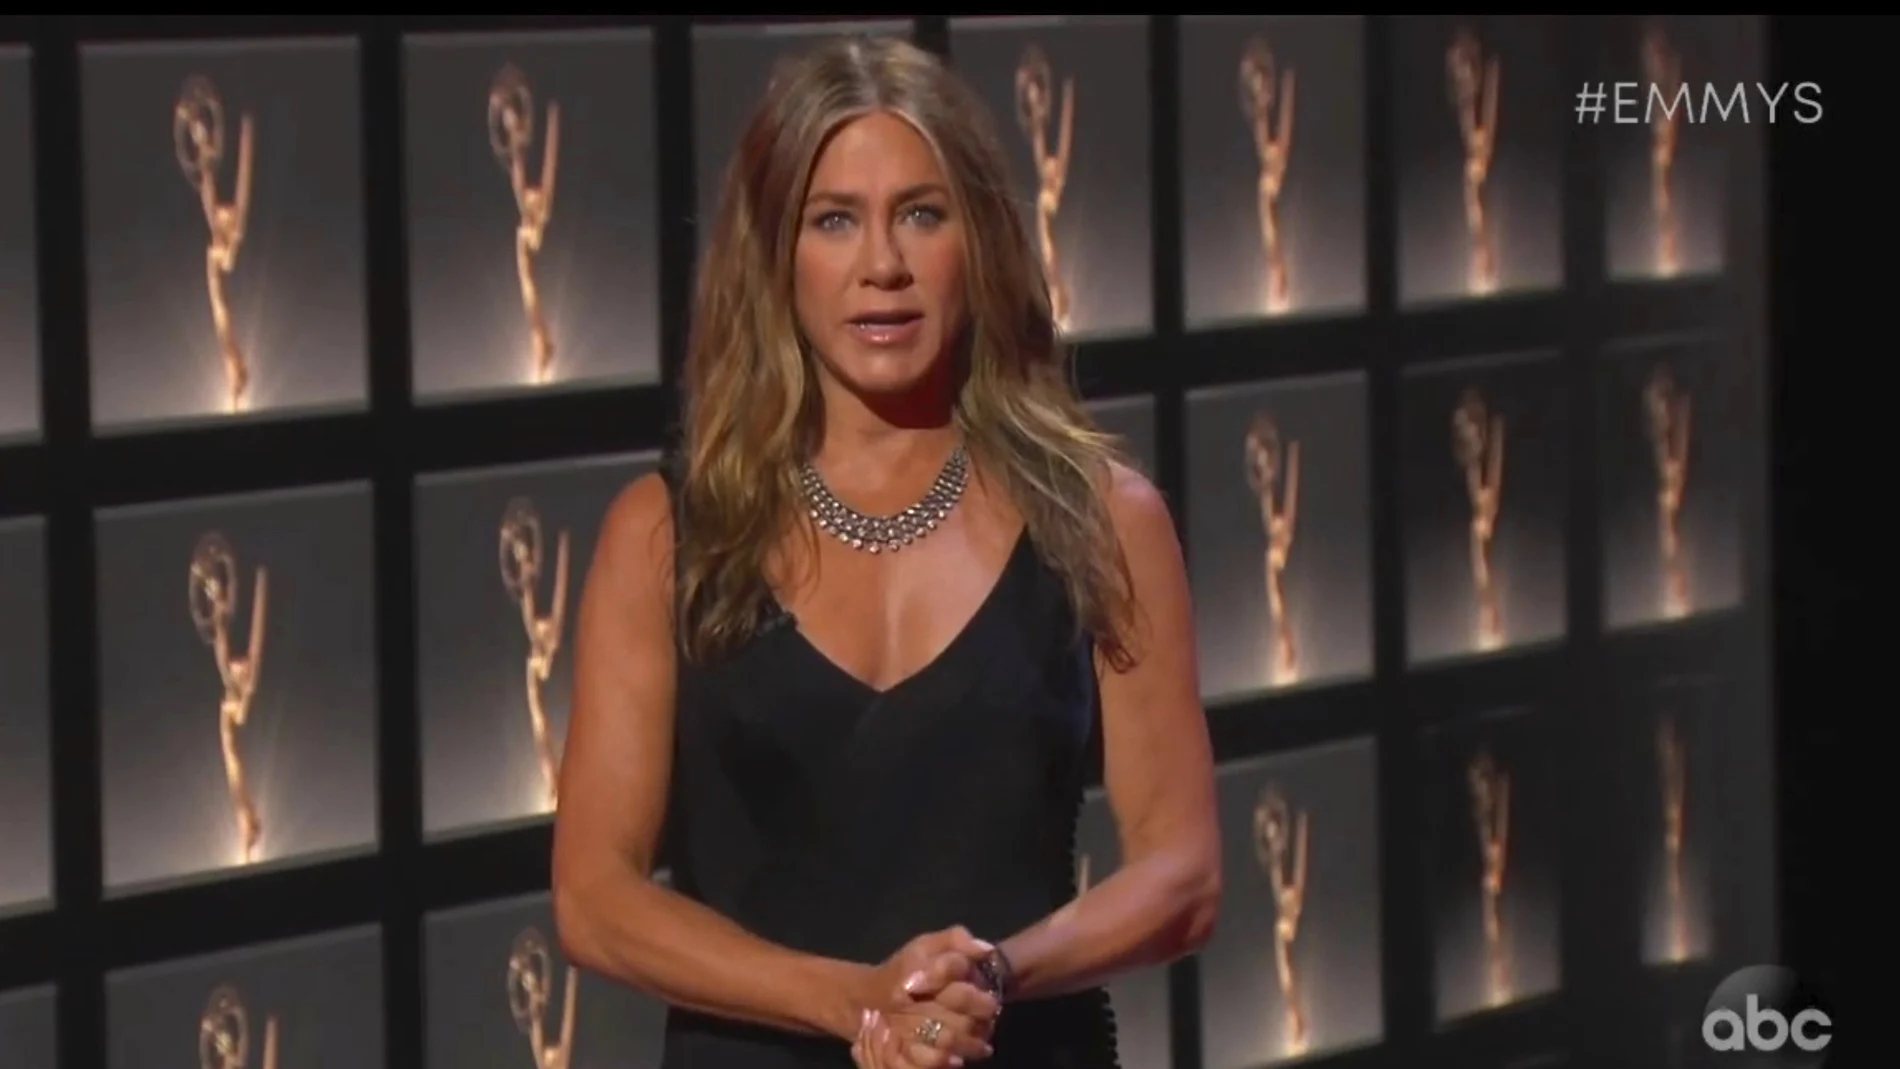 In this video grab captured on Sept. 20, 2020, courtesy of the Academy of Television Arts & Sciences and ABC Entertainment, Jennifer Aniston presents the award for outstanding lead actress in a comedy series during the 72nd Emmy Awards broadcast. (The Television Academy and ABC Entertainment via AP)